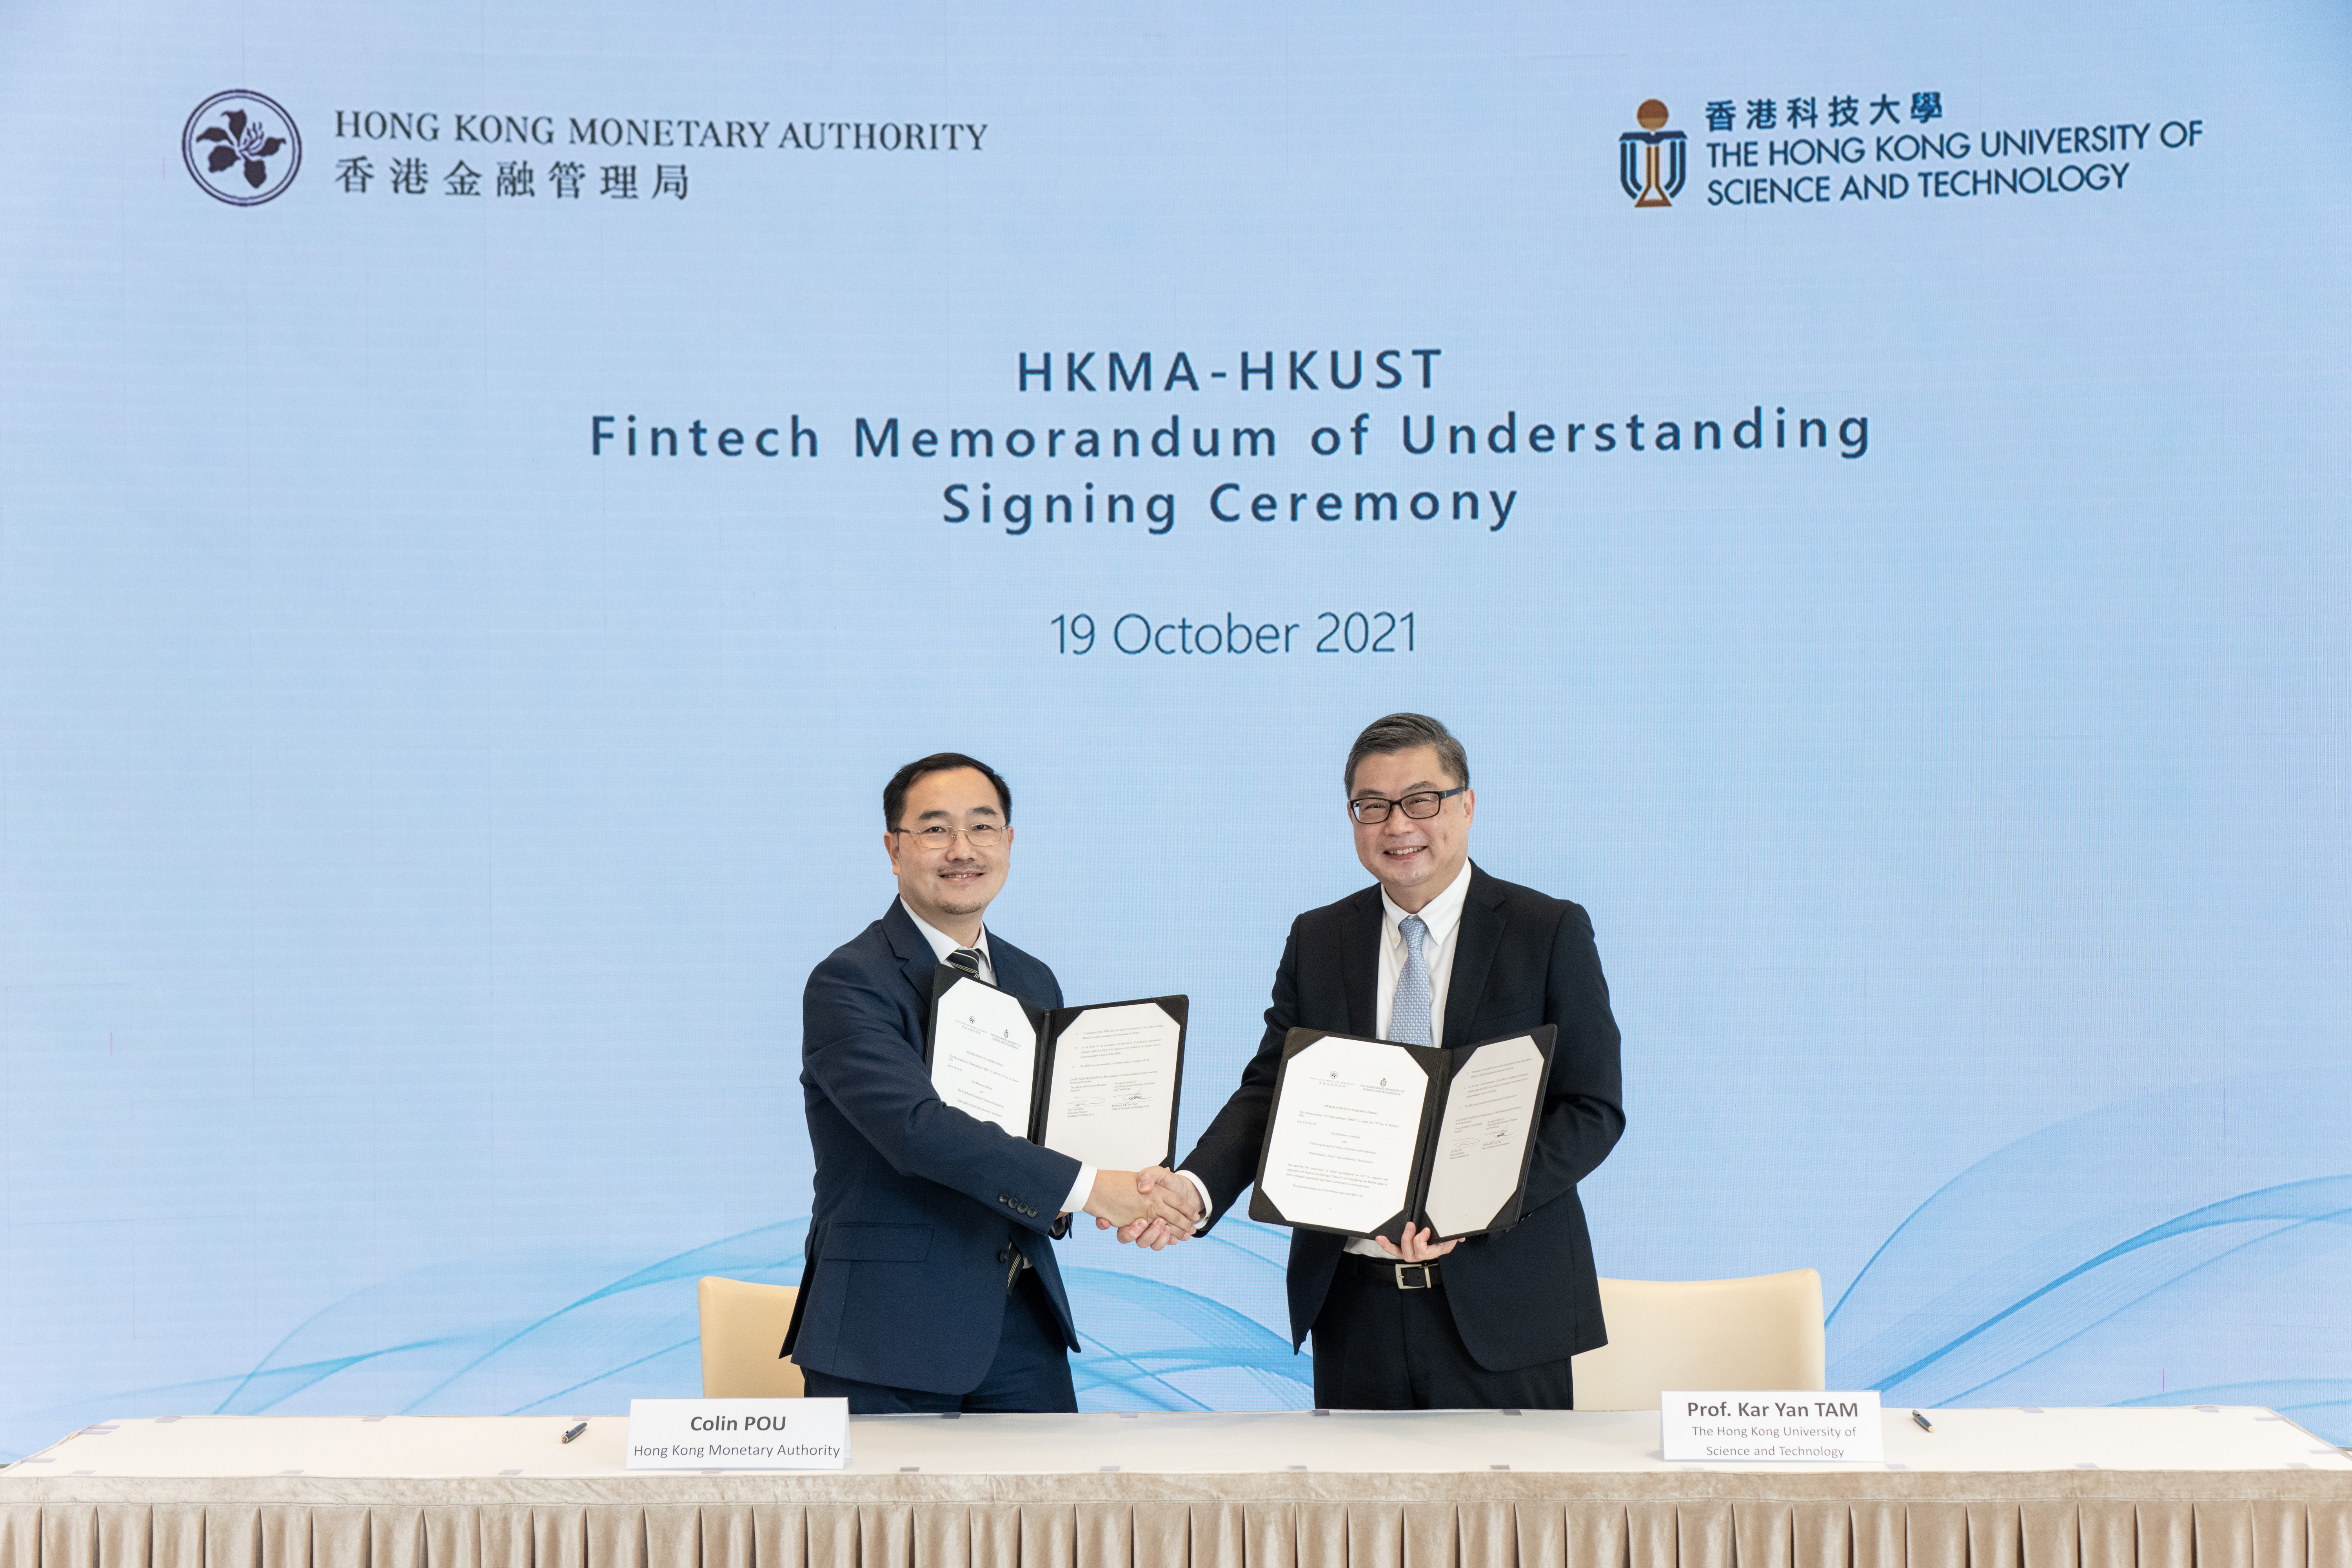 Professor Kar Yan Tam, Dean of Business and Management, the Hong Kong University of Science and Technology (HKUST), signed the MoU with Mr Colin Pou.